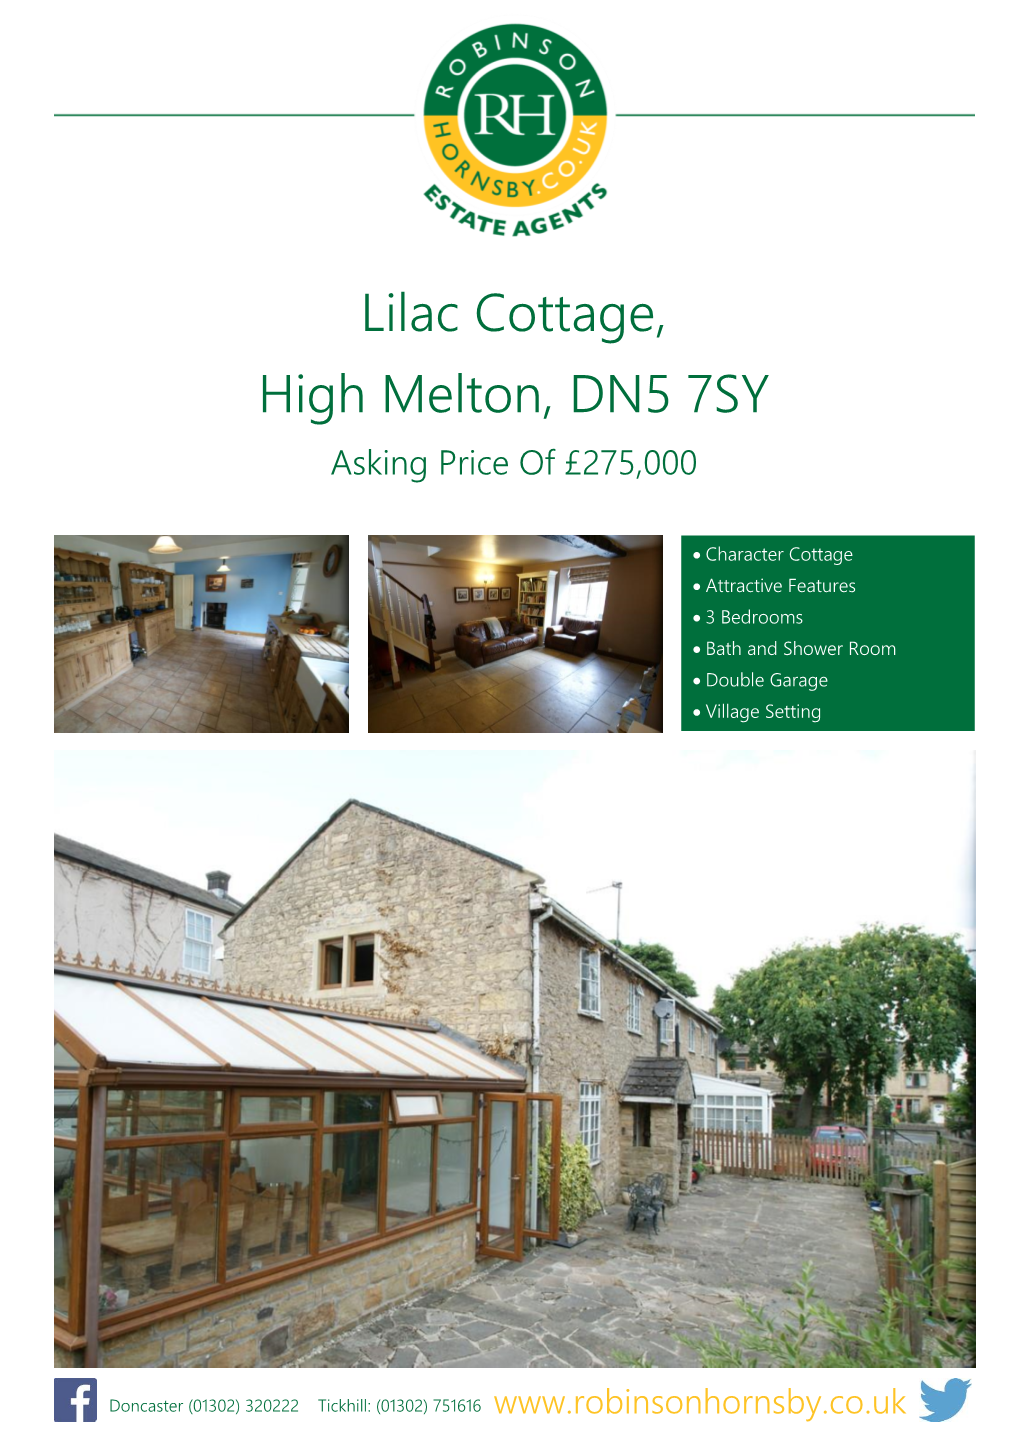 Lilac Cottage, High Melton, DN5 7SY Asking Price of £275,000